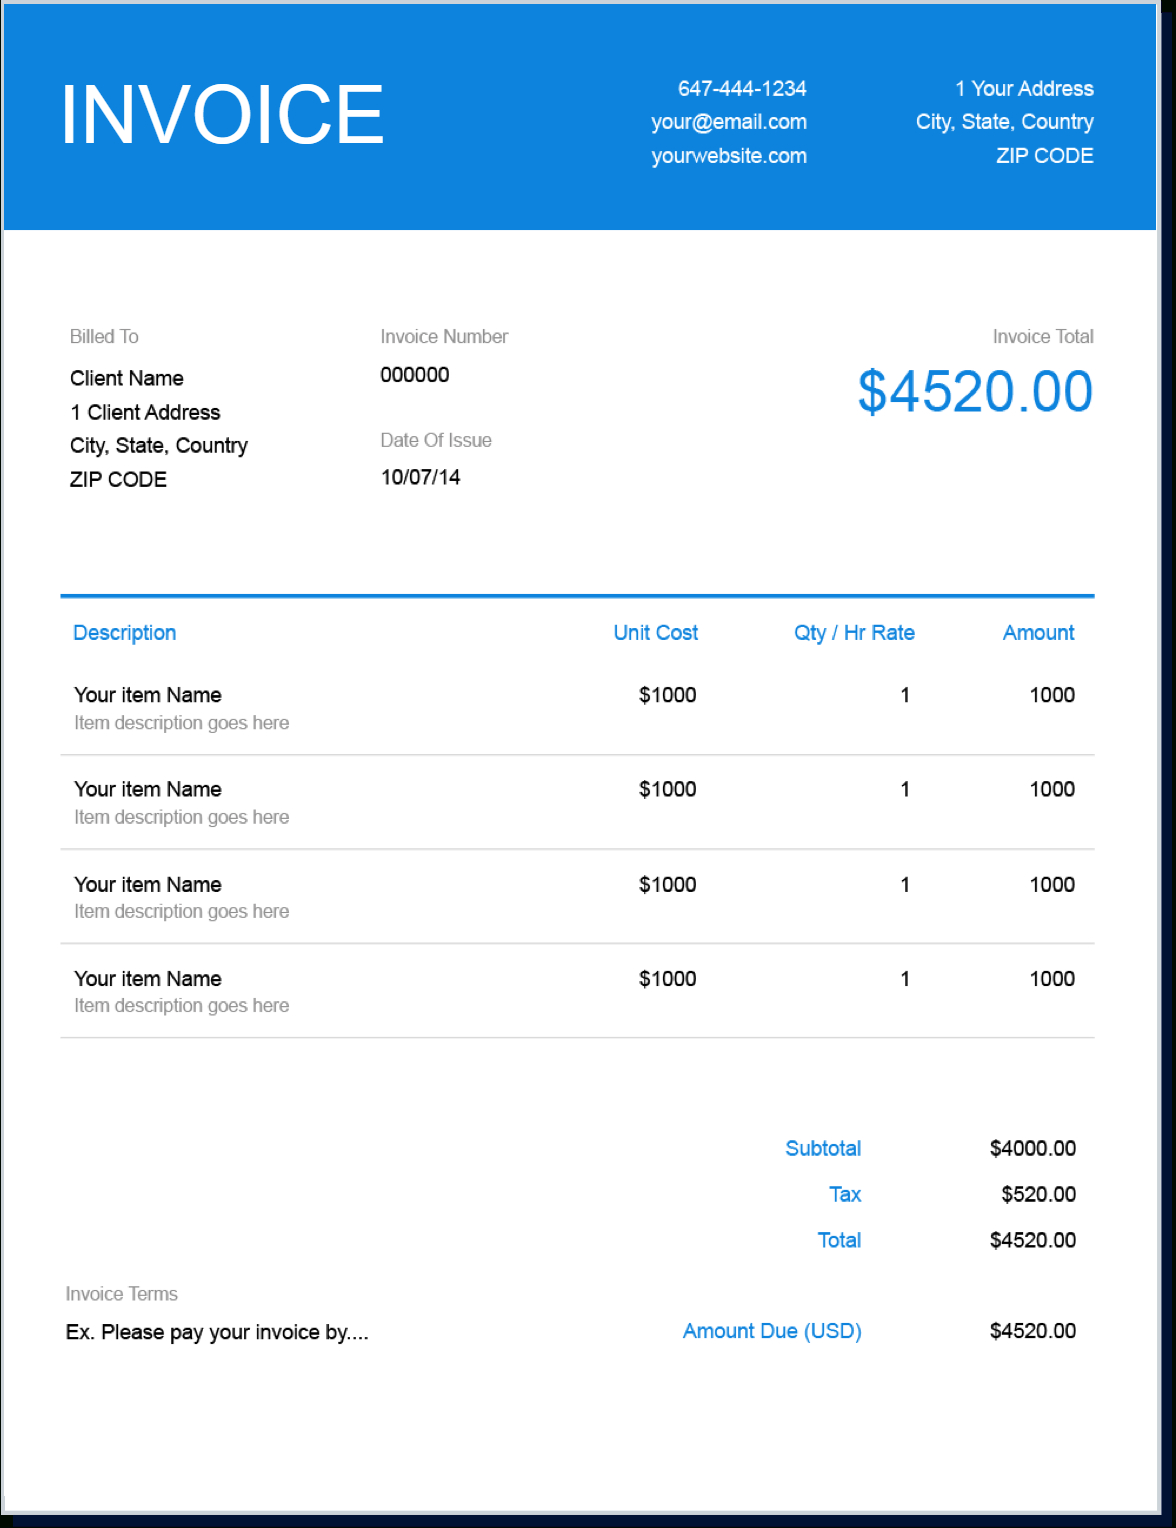 Invoice Template | Send In Minutes | Create Free Invoices Instantly - Invoice Templates Printable Free Word Doc